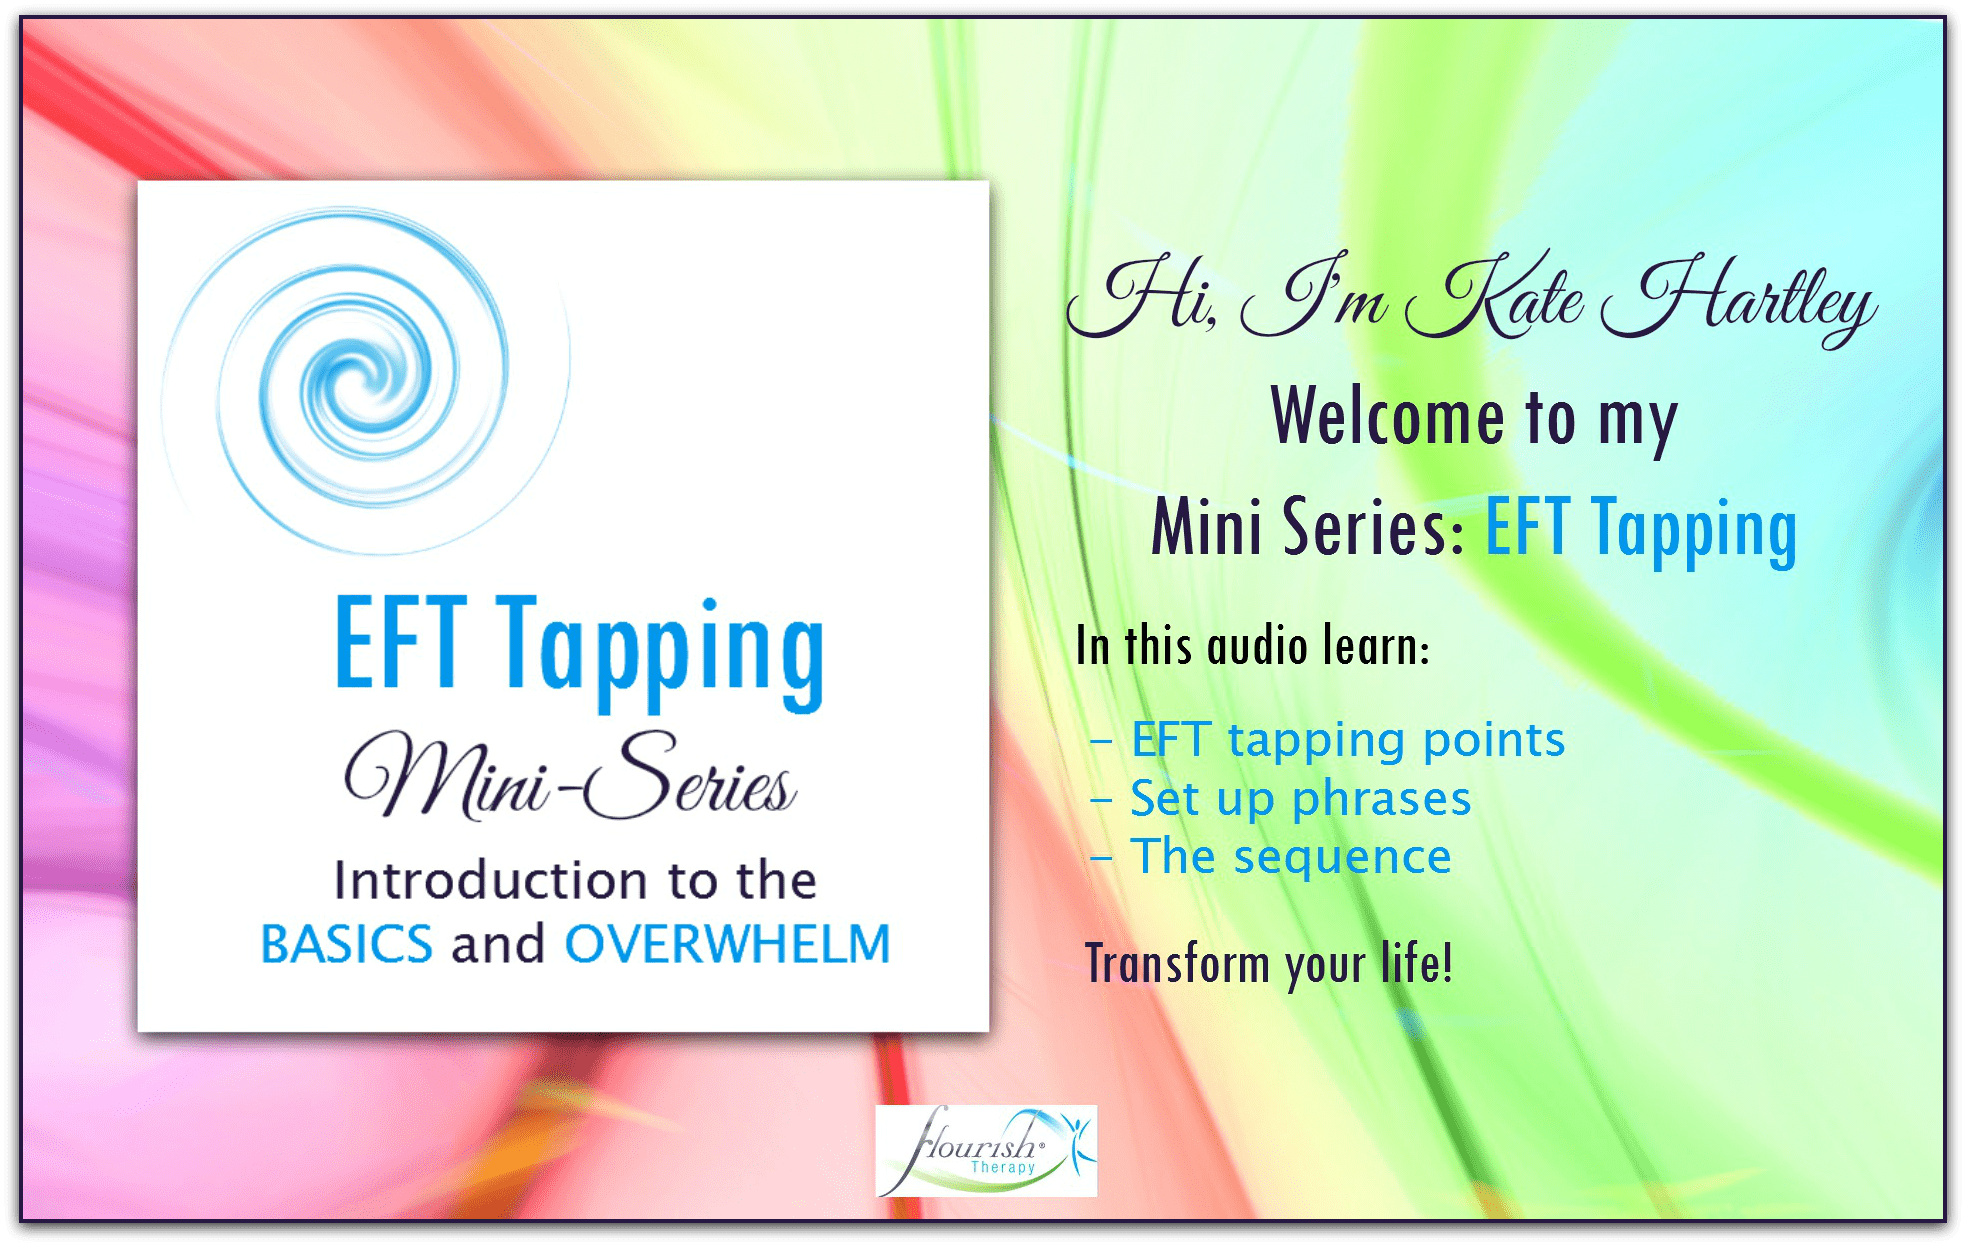 EFT Tapping Introduction